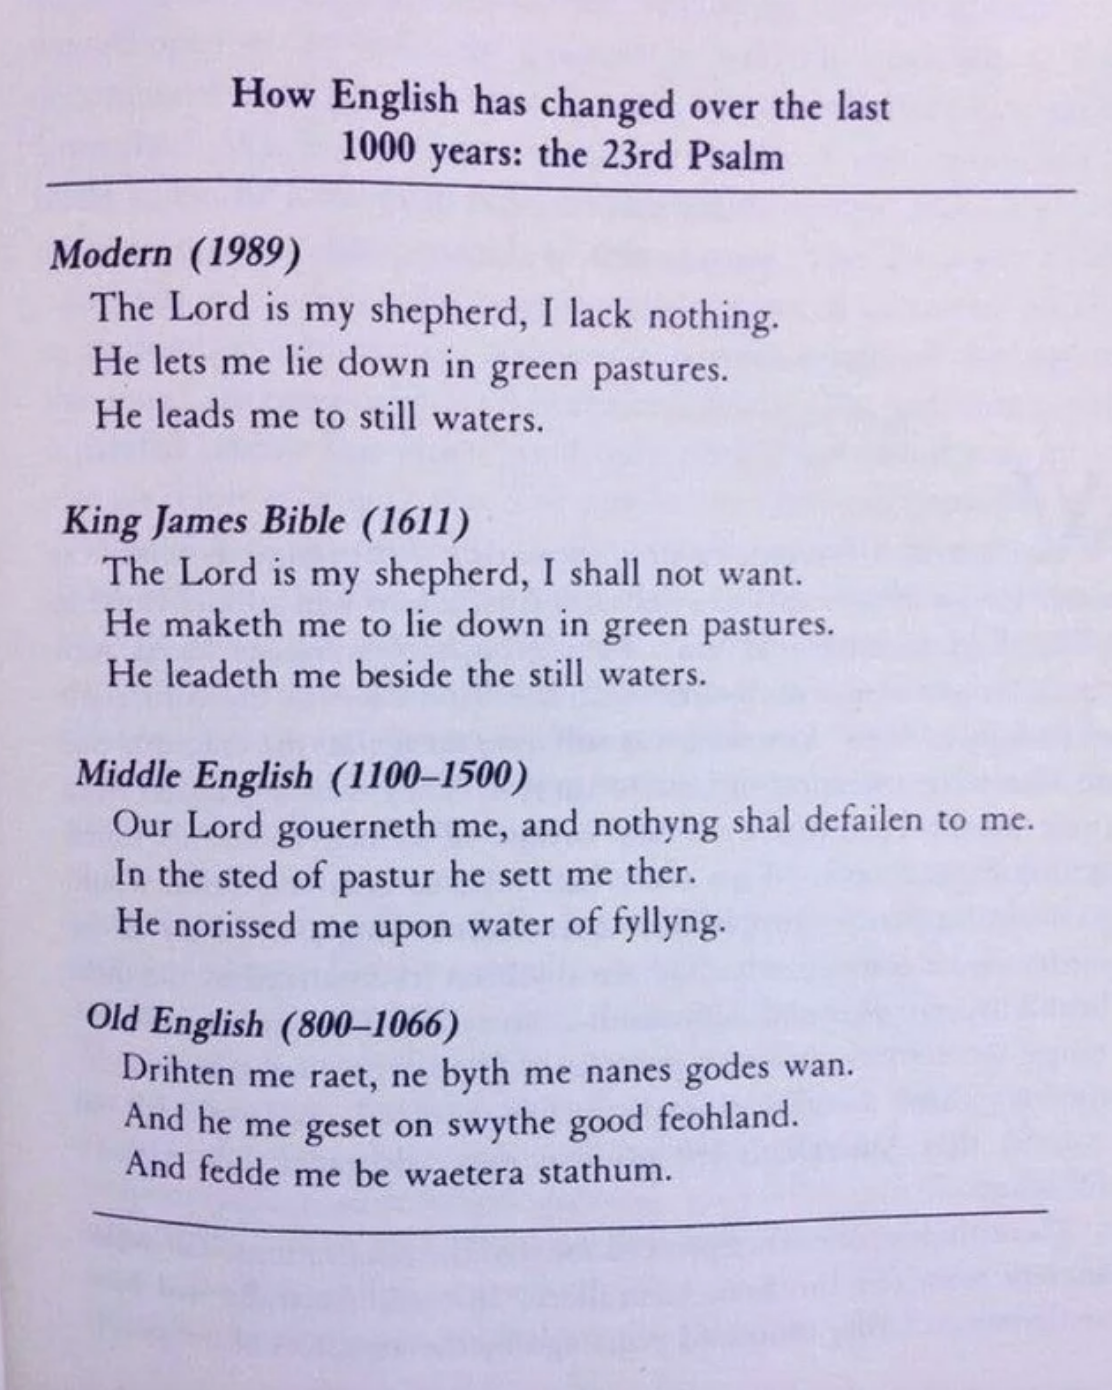 The 23rd Psalm from Old English to Middle English to the King James Bible version to modern English, a period of over 1,000 years, from 800 to 1989